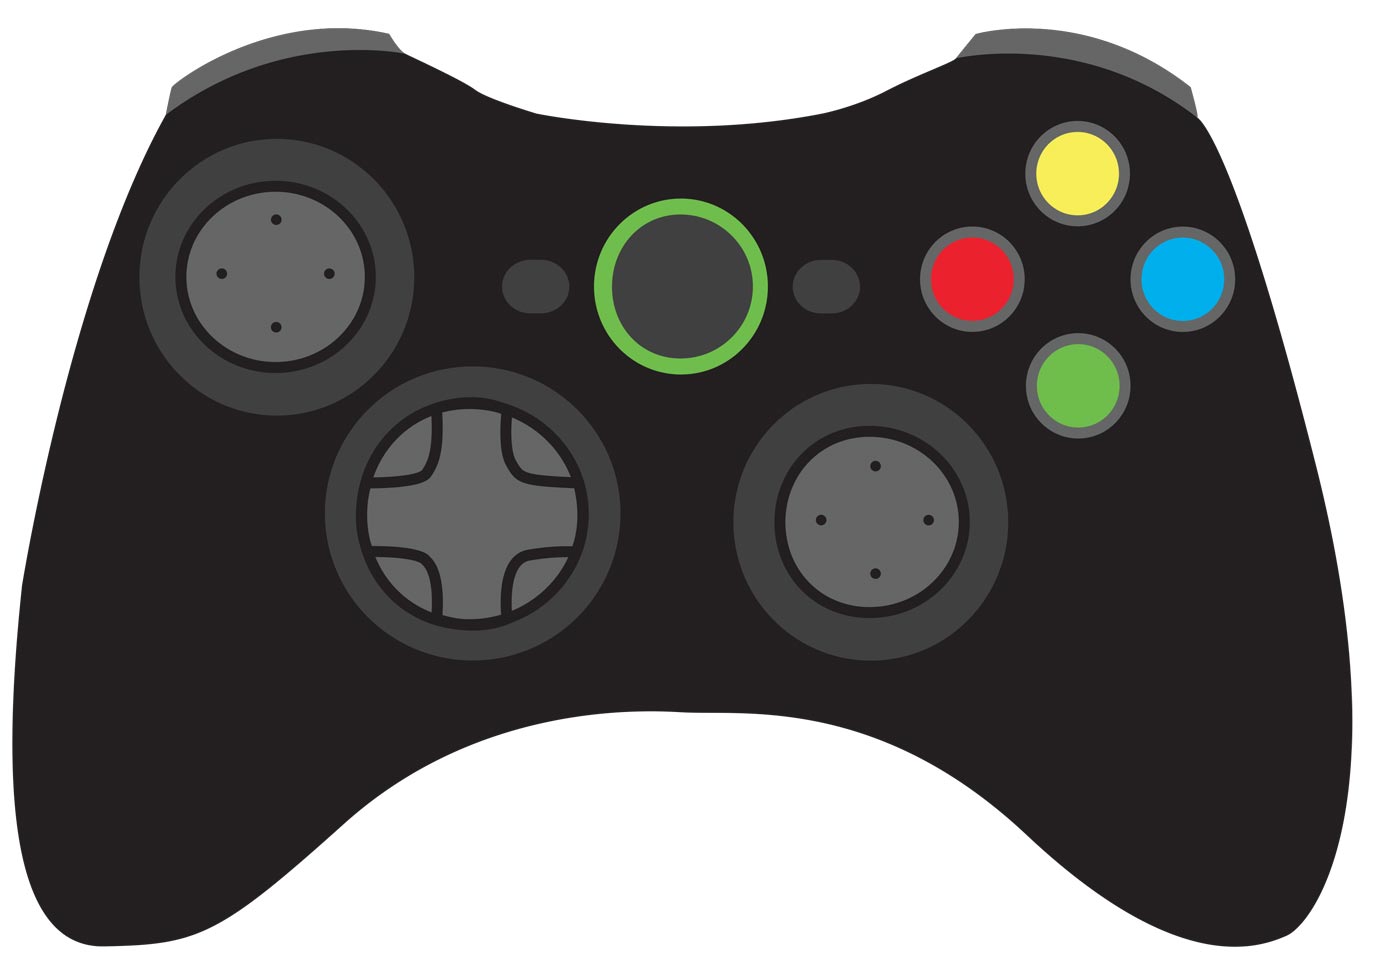 10 Game Controller Vector Images - Game Controller Icon, Game